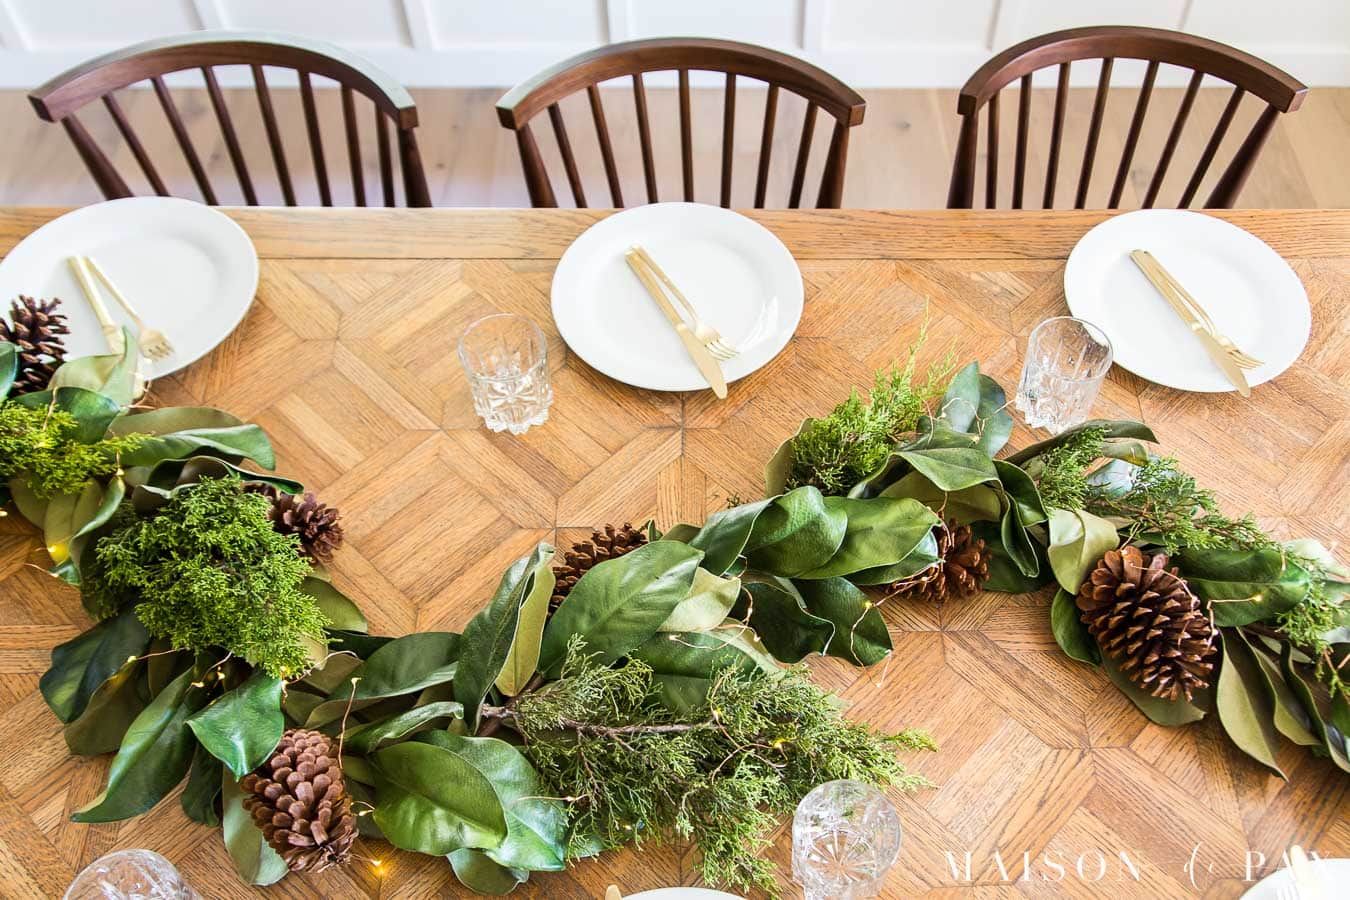 magnolia leaf garland and cedar with twinkle lights on dining table | Maison de Pax